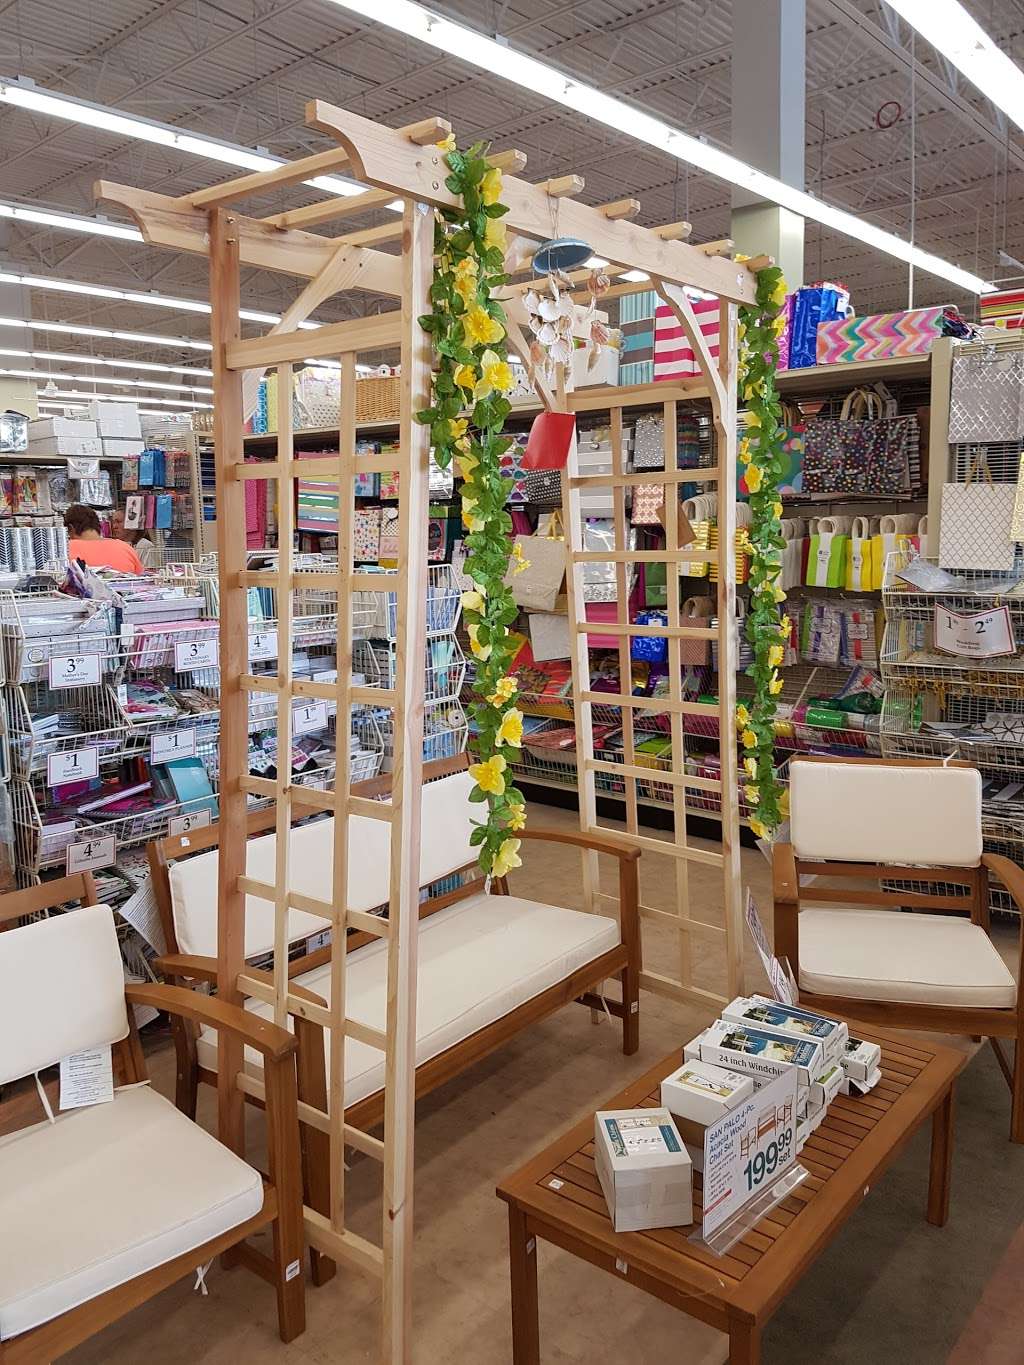 Christmas Tree Shops | 1100-1300 N Galleria Dr, Middletown, NY 10941 | Phone: (845) 692-8584